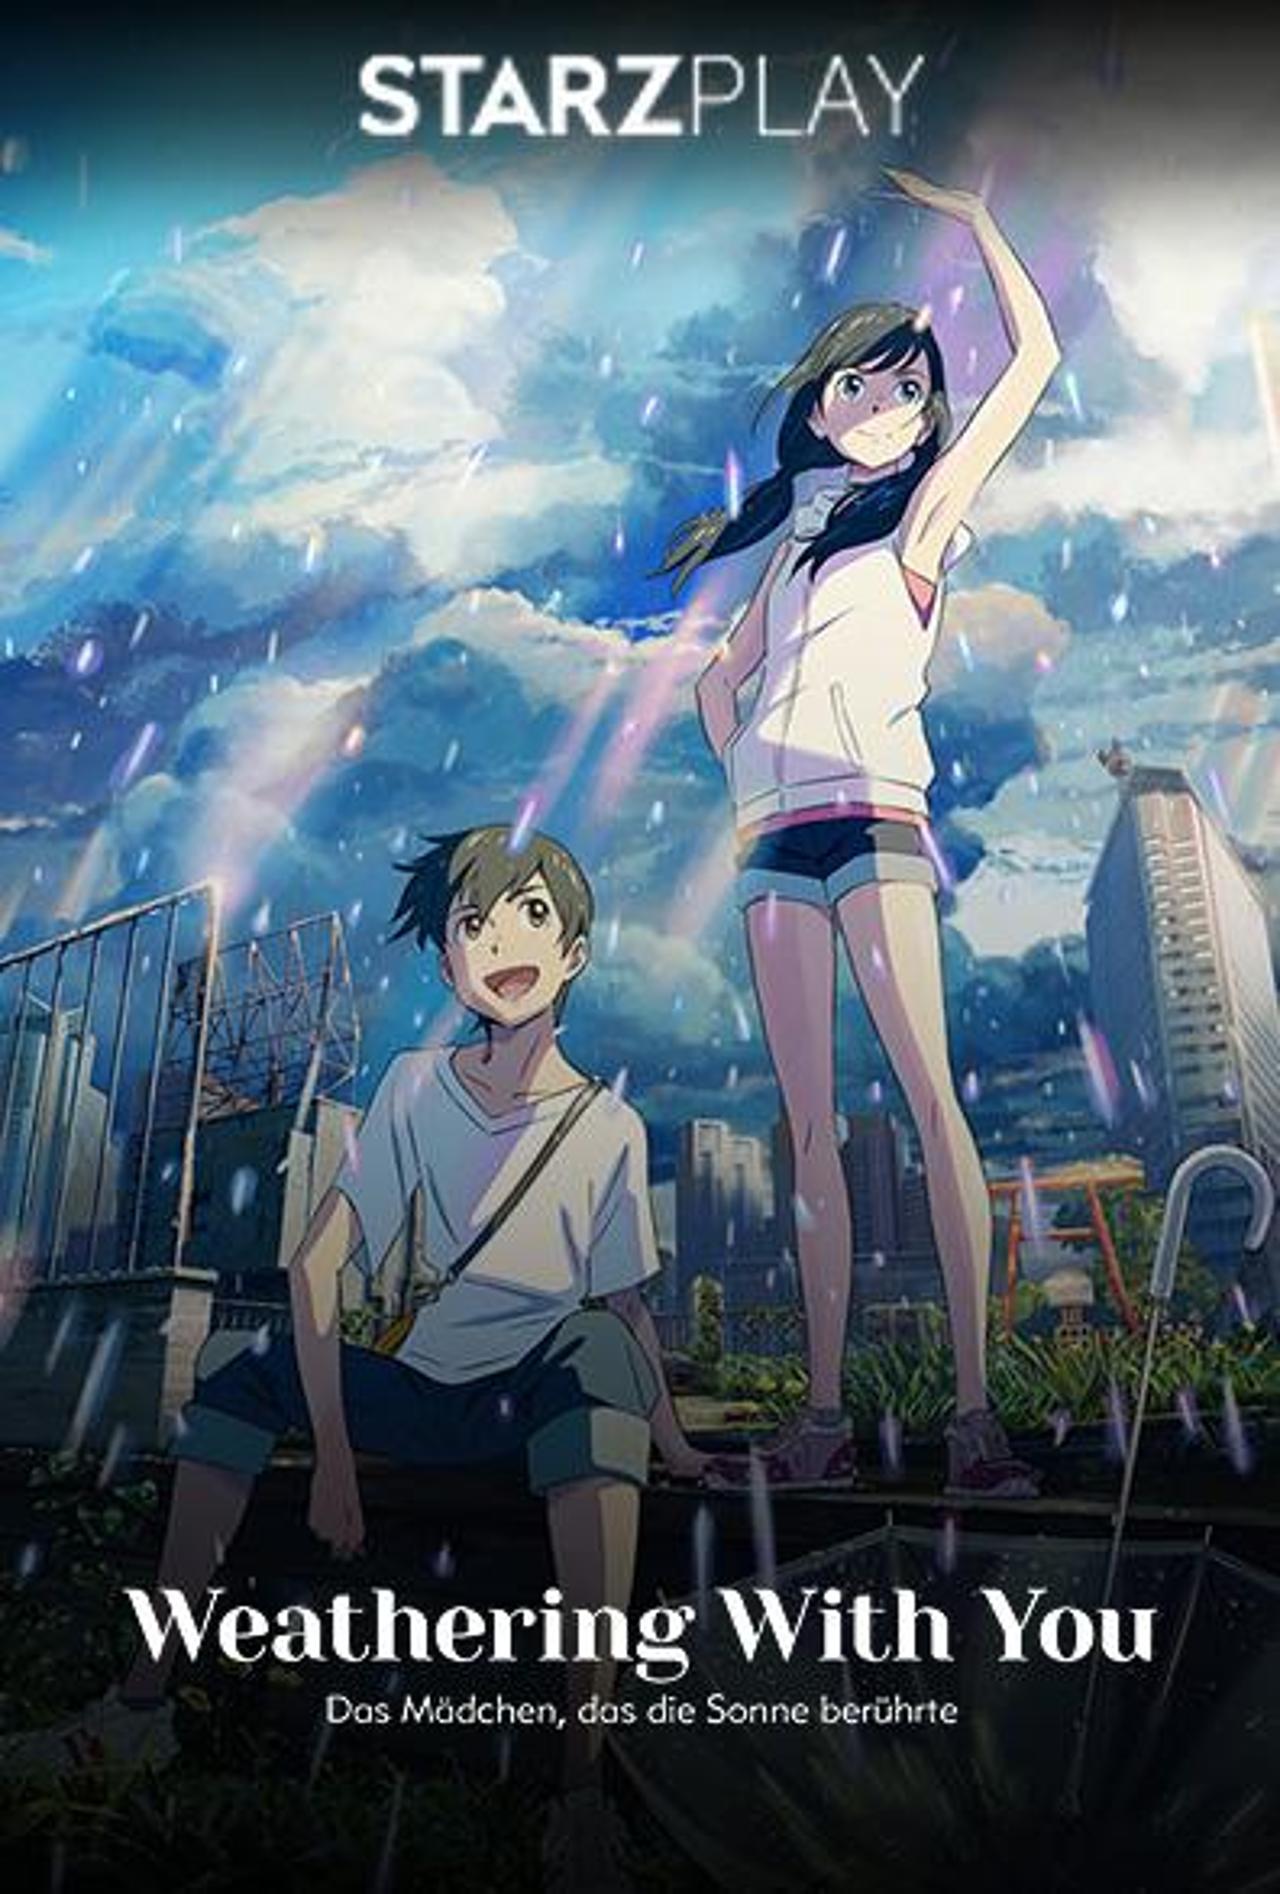 Weathering With You Makoto Shinkaidirected anime film selected as  Japans entry for Oscars 2020Entertainment News  Firstpost